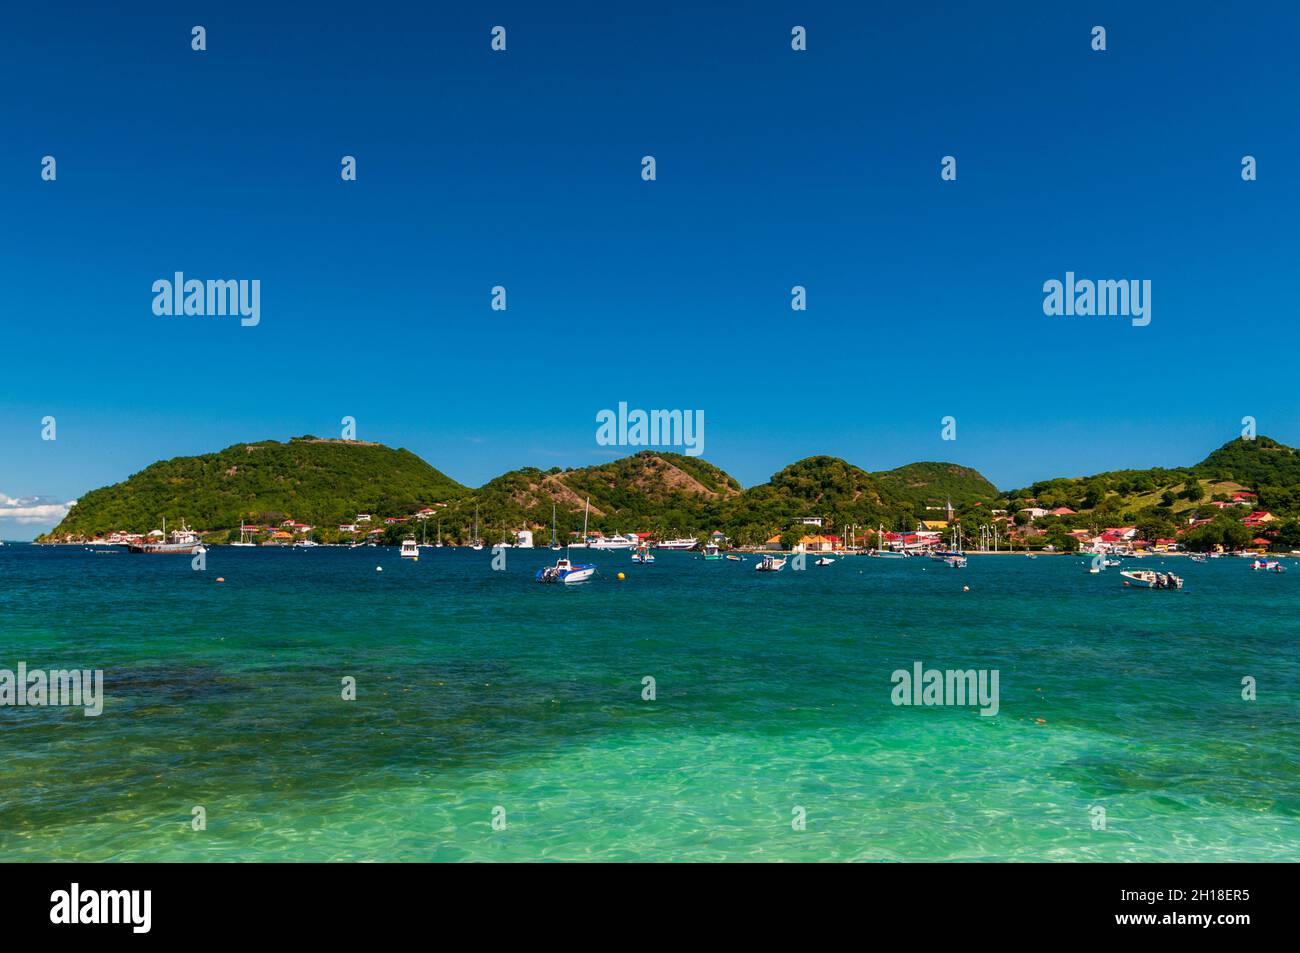 Yachts anchored in the Caribbean off the coast of Le Bourg. Terre de Haut, Iles des Saintes, Guadeloupe, West Indies. Stock Photo